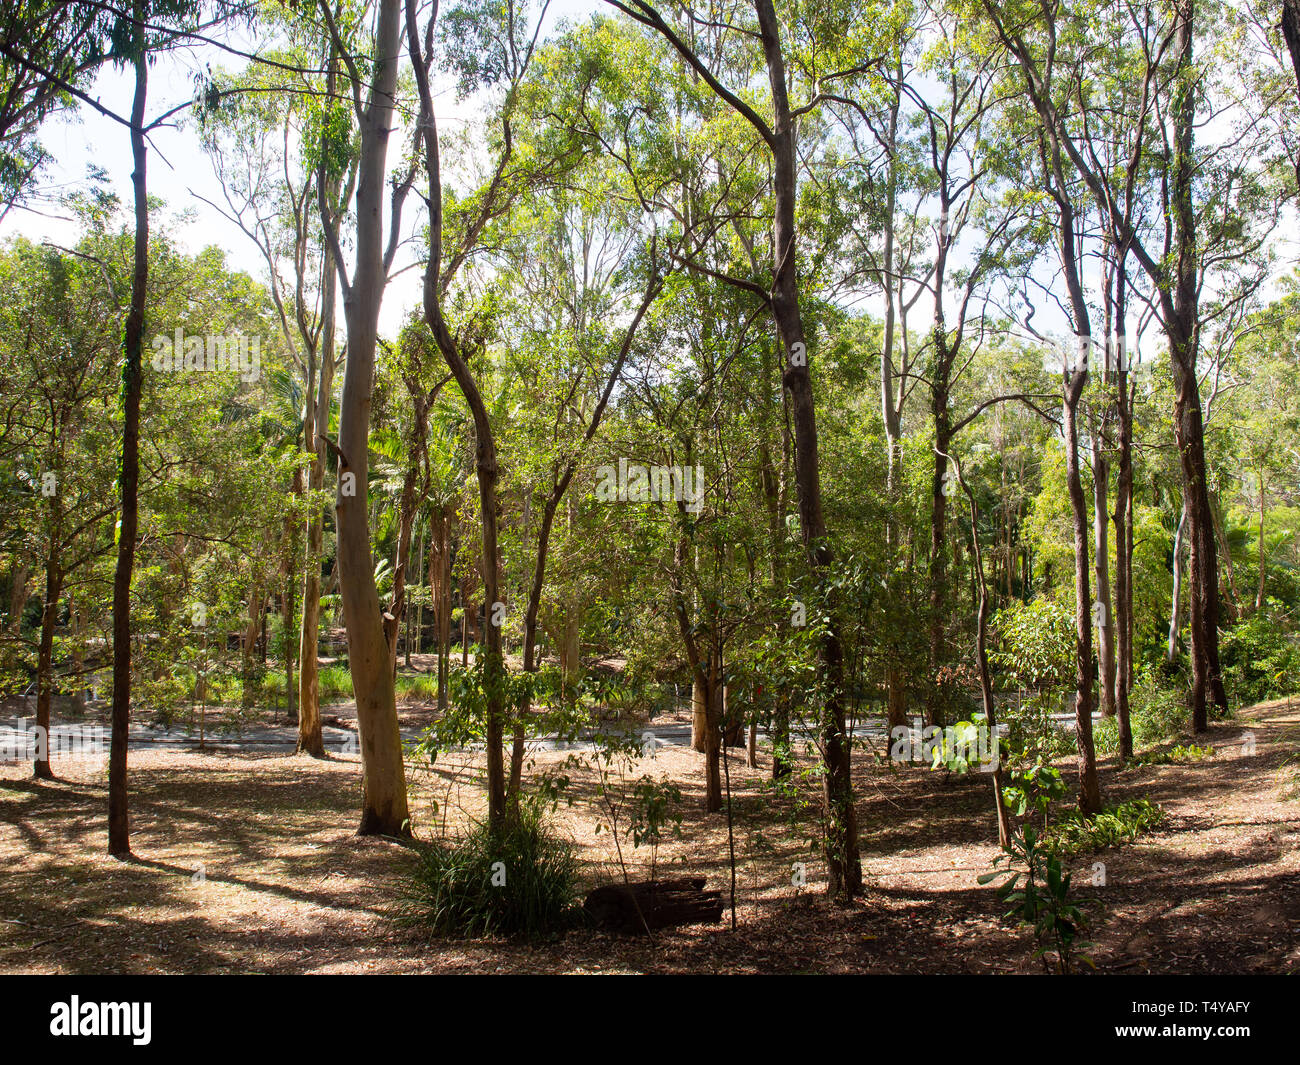 Landscape Of Trees In A Nature Reserve Stock Photo